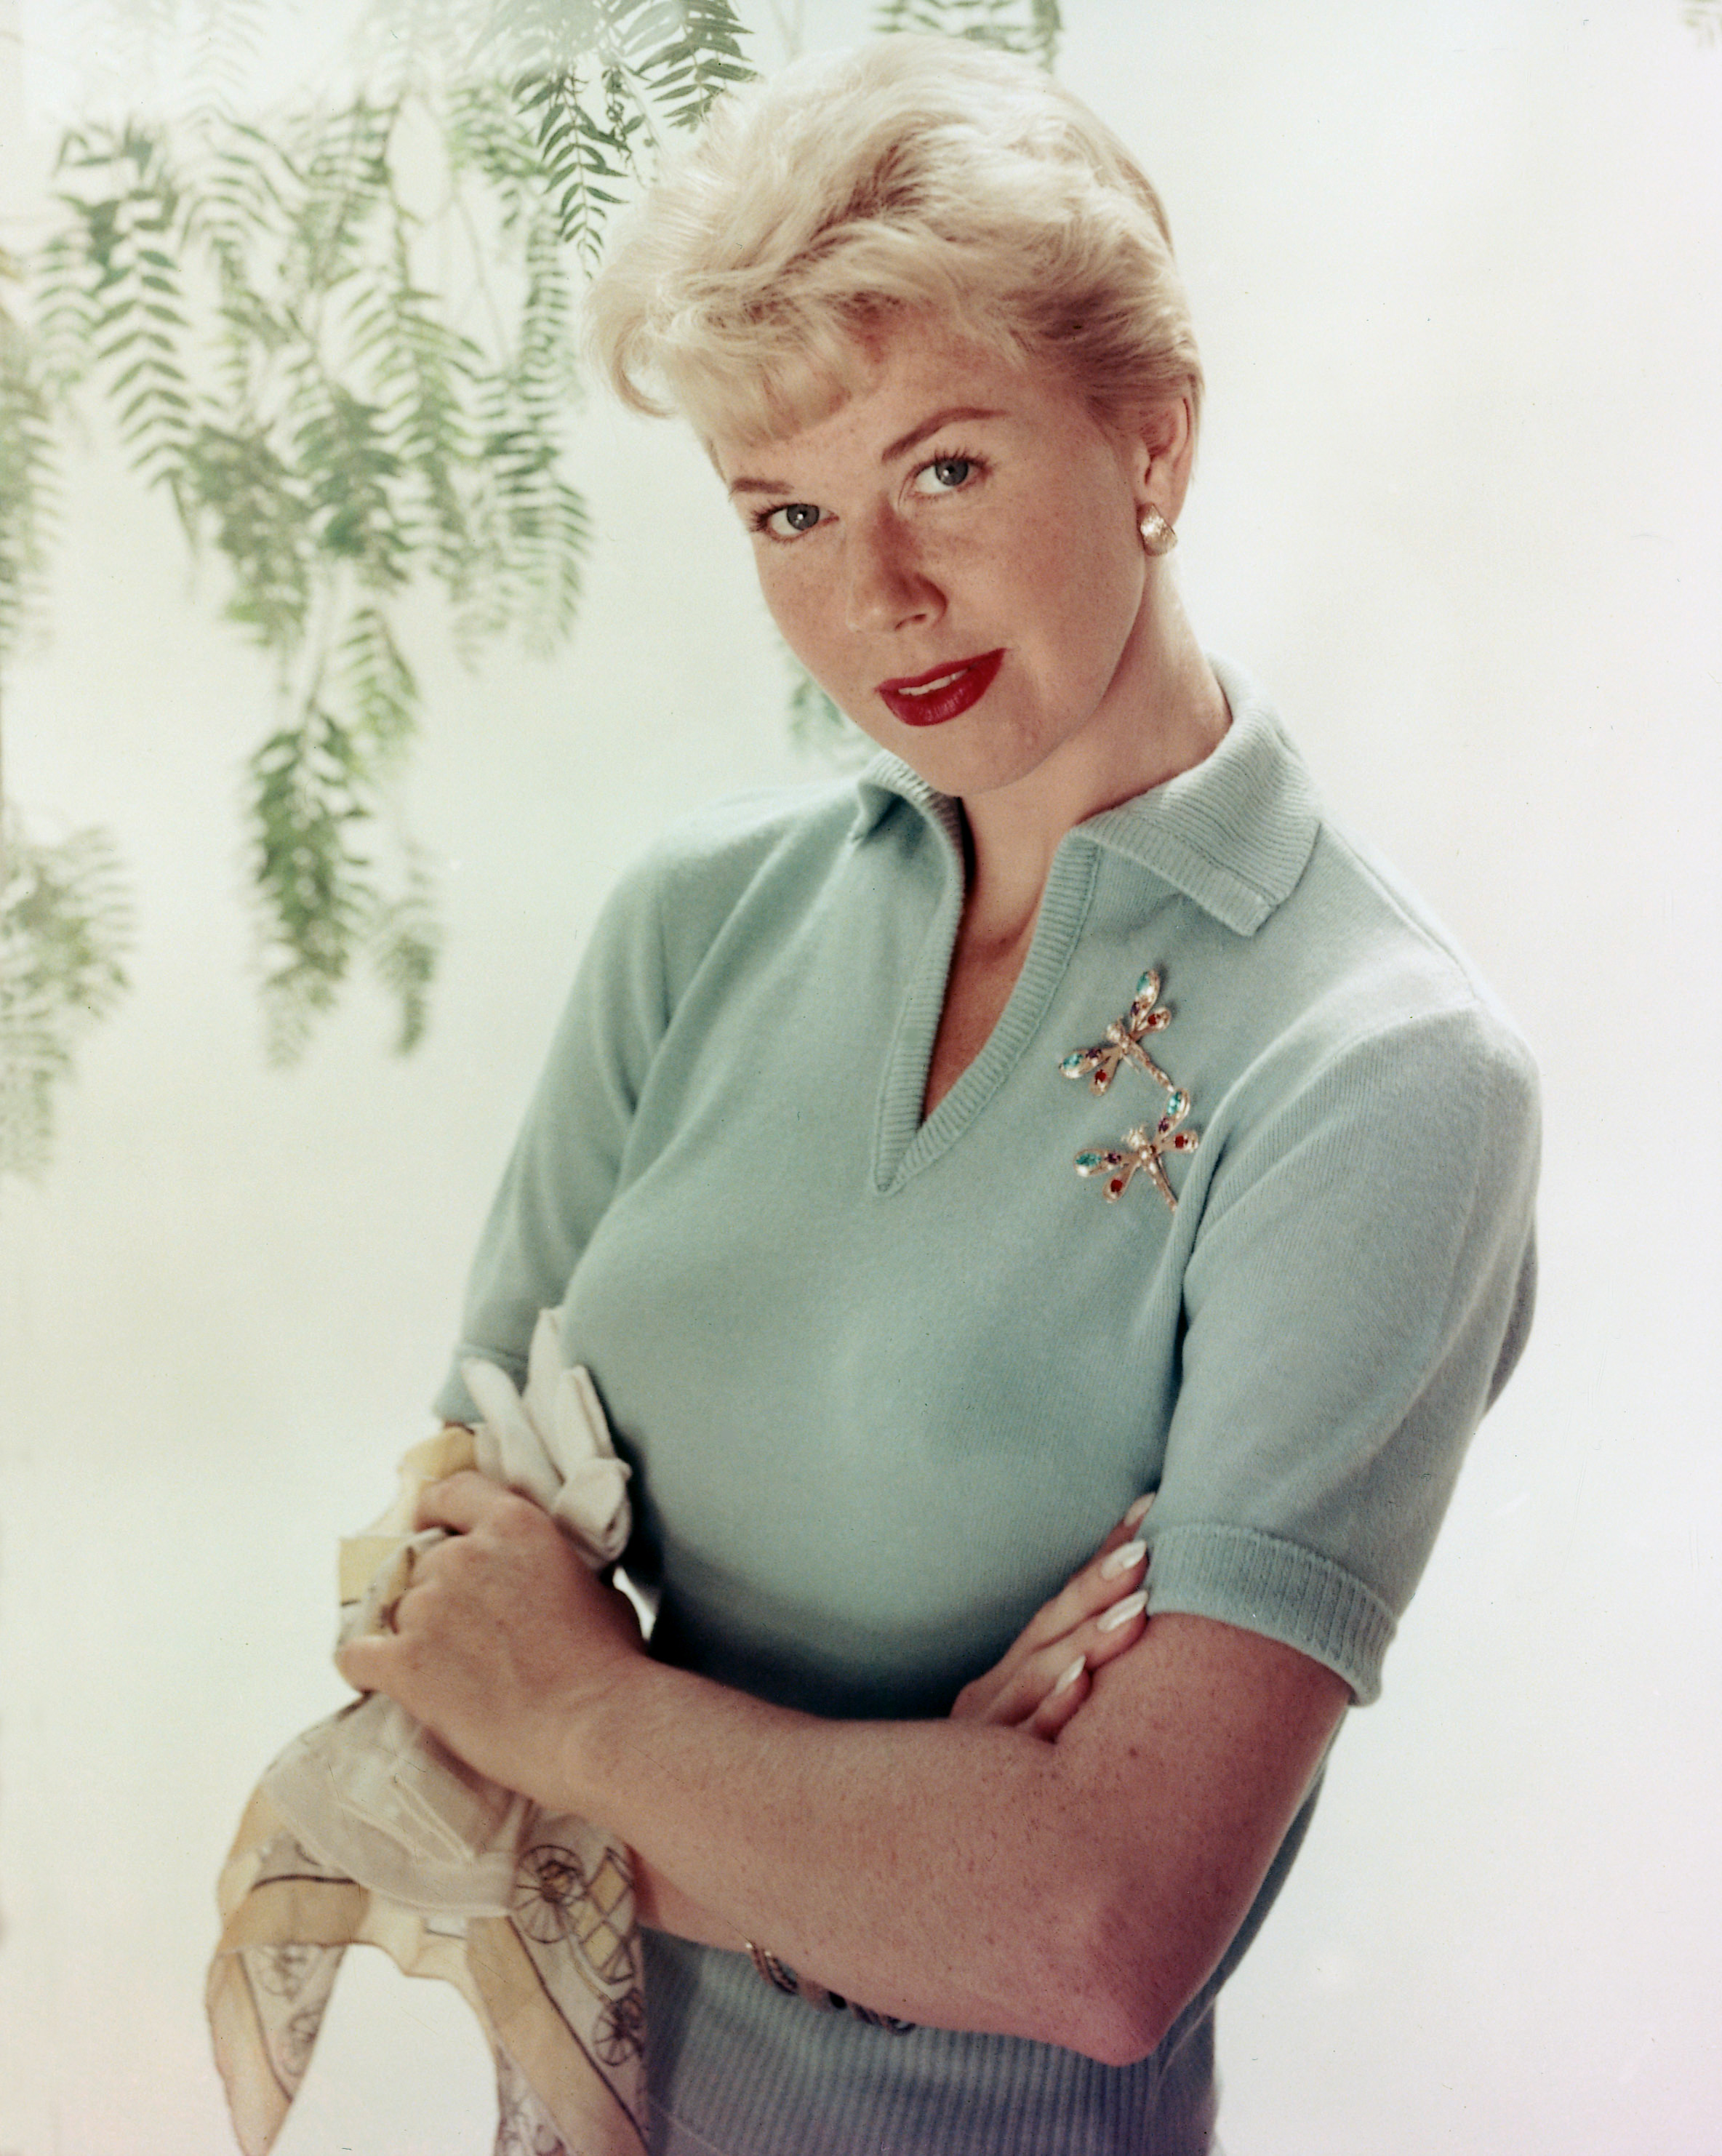 Dori Day photographed in 1955 | Source: Getty Images